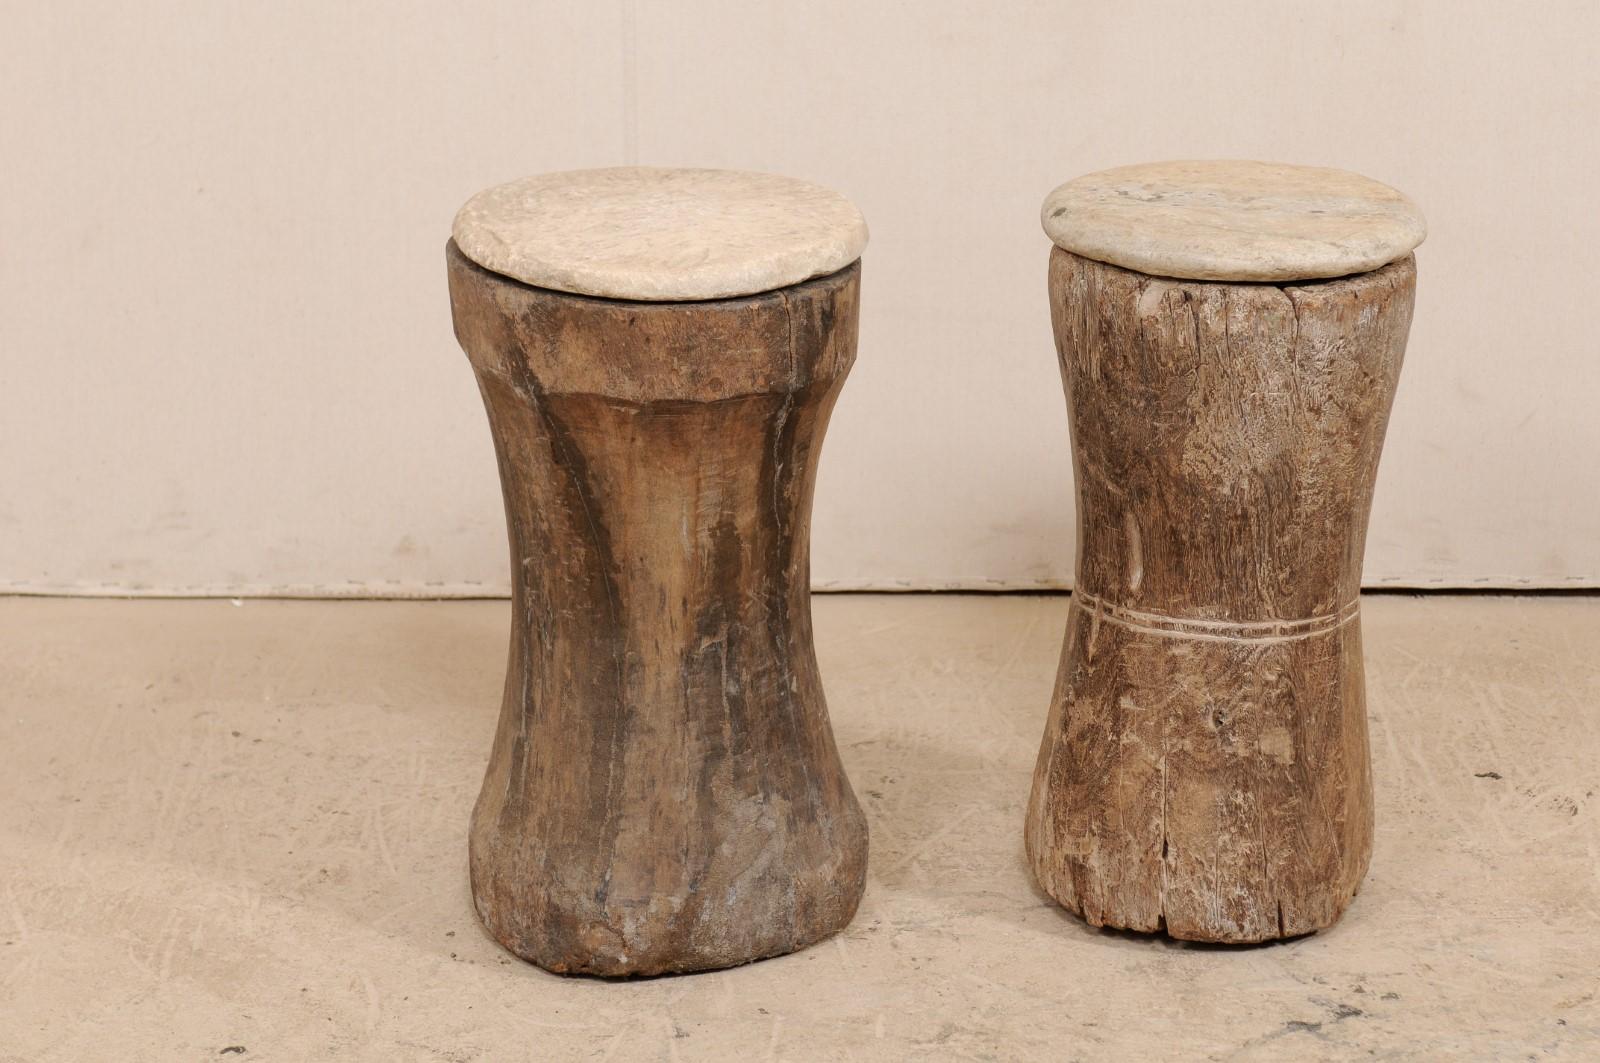 Pair of 19th Century Rustic Wood Mortar Side Tables with Antique Stone Tops 2